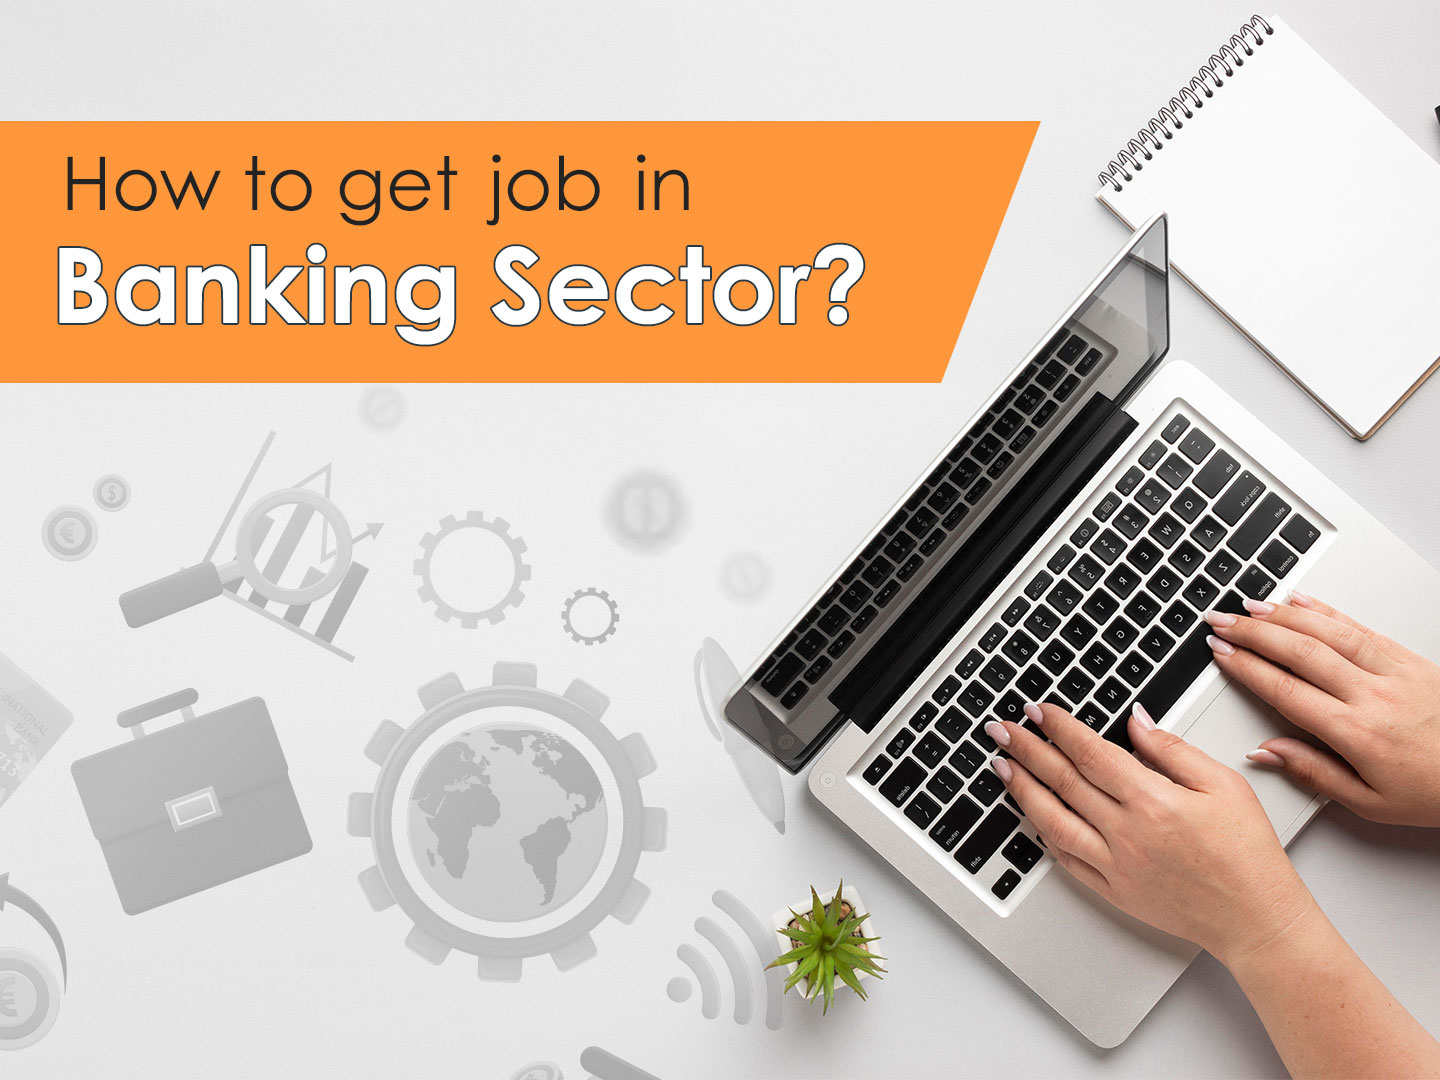 7 things to follow to get a job in Banking